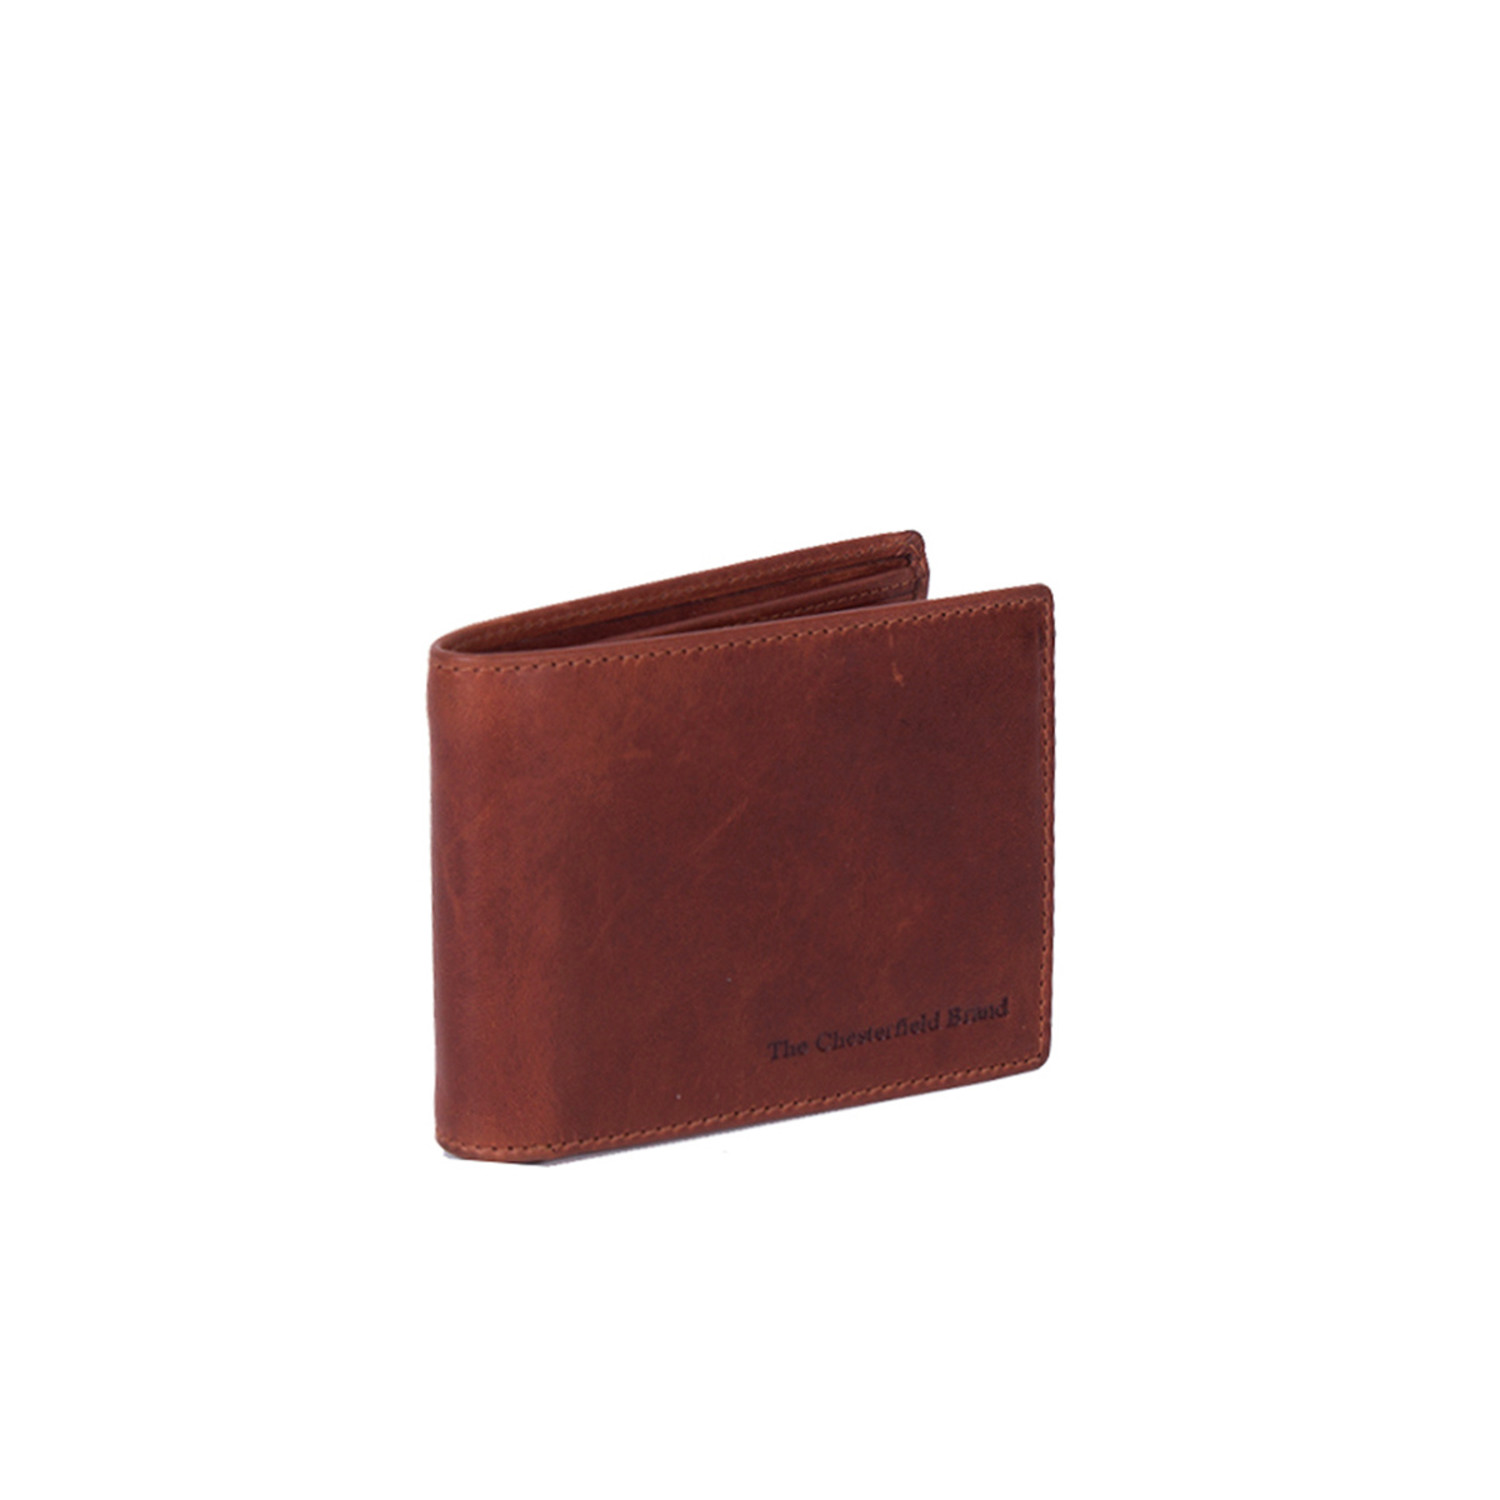 Leather Wallets  Shop The Chesterfield Brand for nice wallets